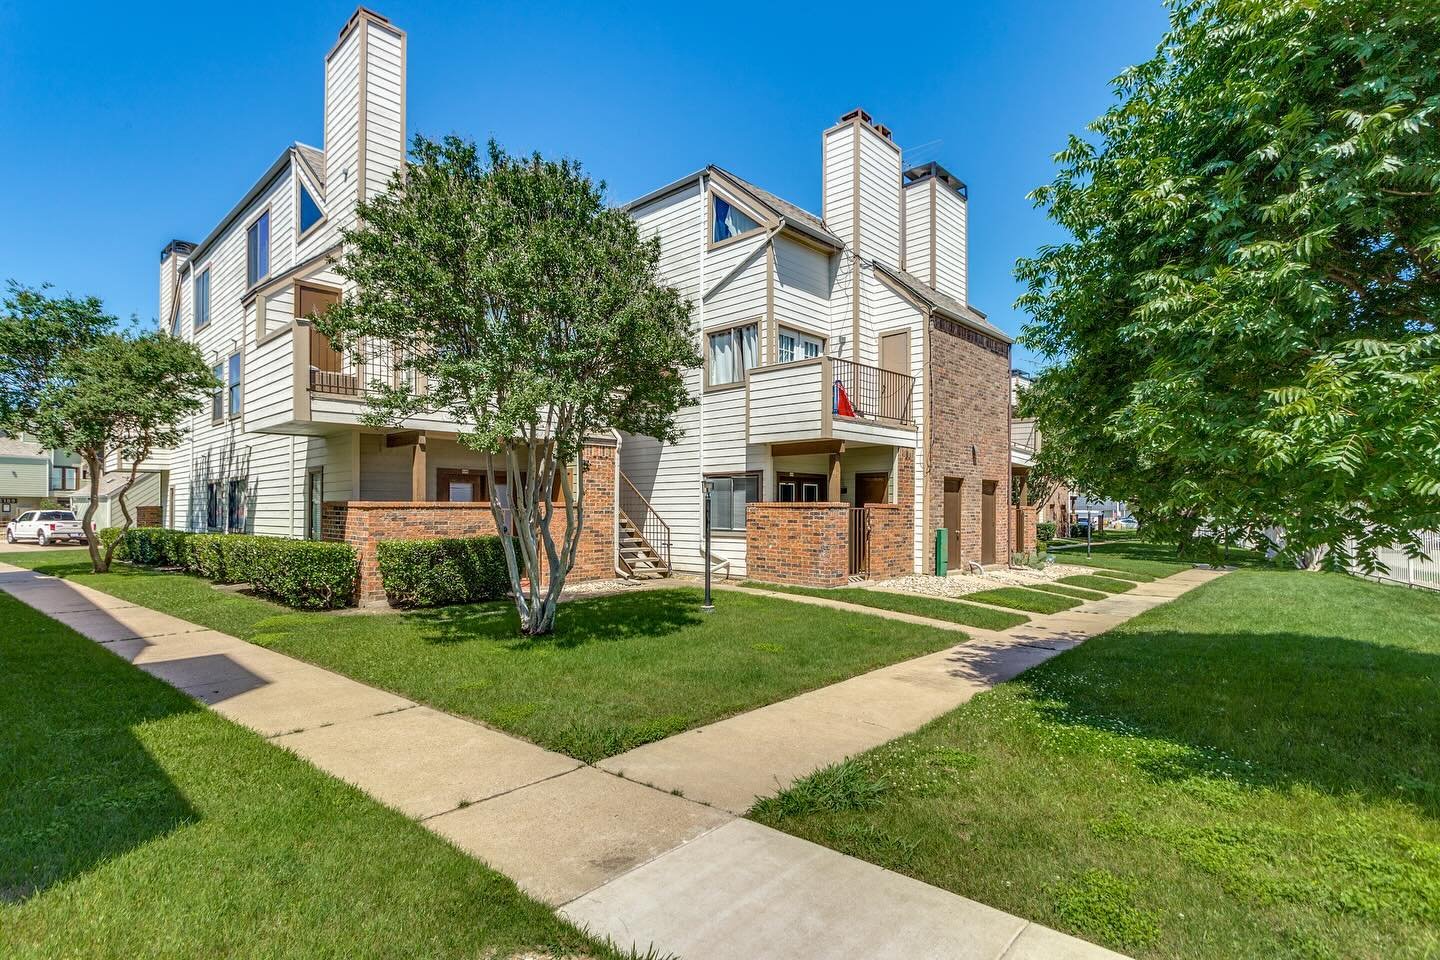 JUST HIT THE MARKET🎉
3121 Sondra Drive #E102 in 76107👀

Listing agent:  Melanie Davis 817-312-5100 melanie@asaygrouprealestate.com

Conveniently located, this cozy condo is just minutes from University of North Texas Health Science Center at Fort W